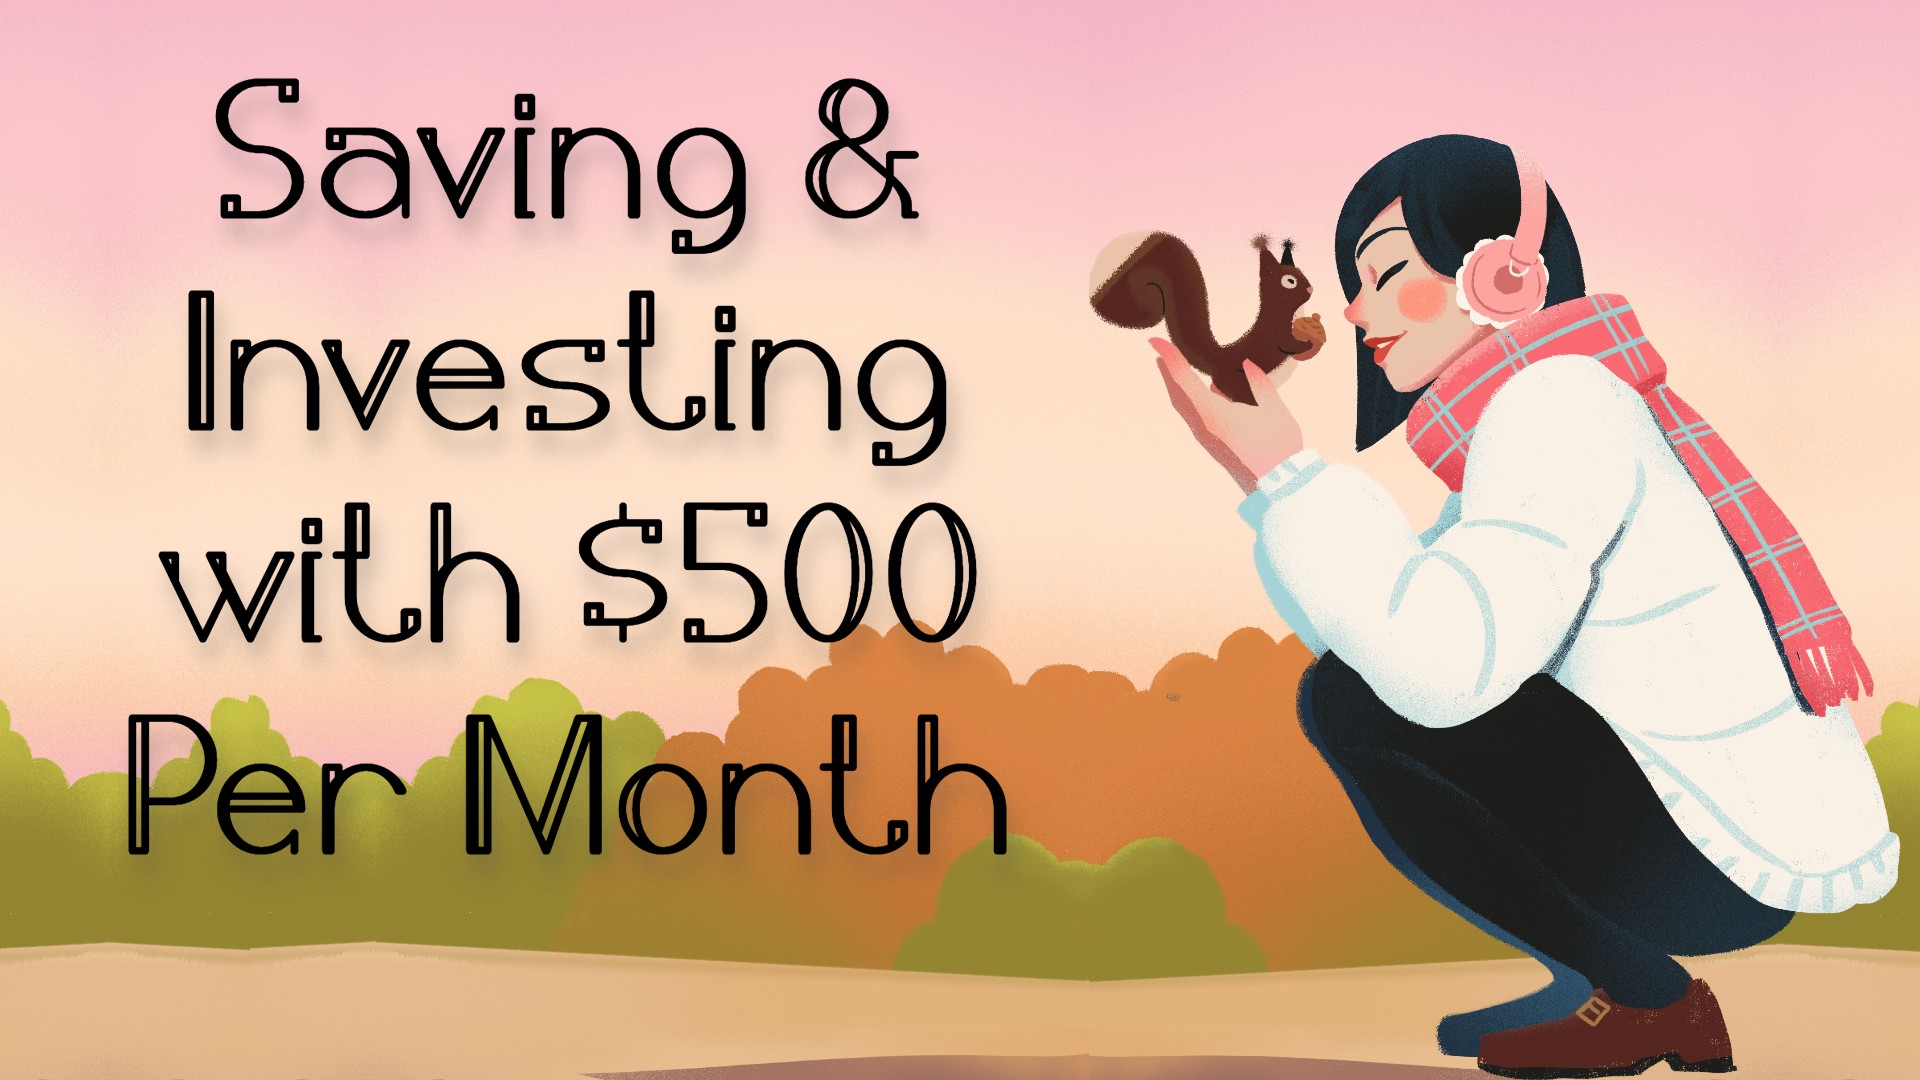 Saving & Investing with $500 per Month